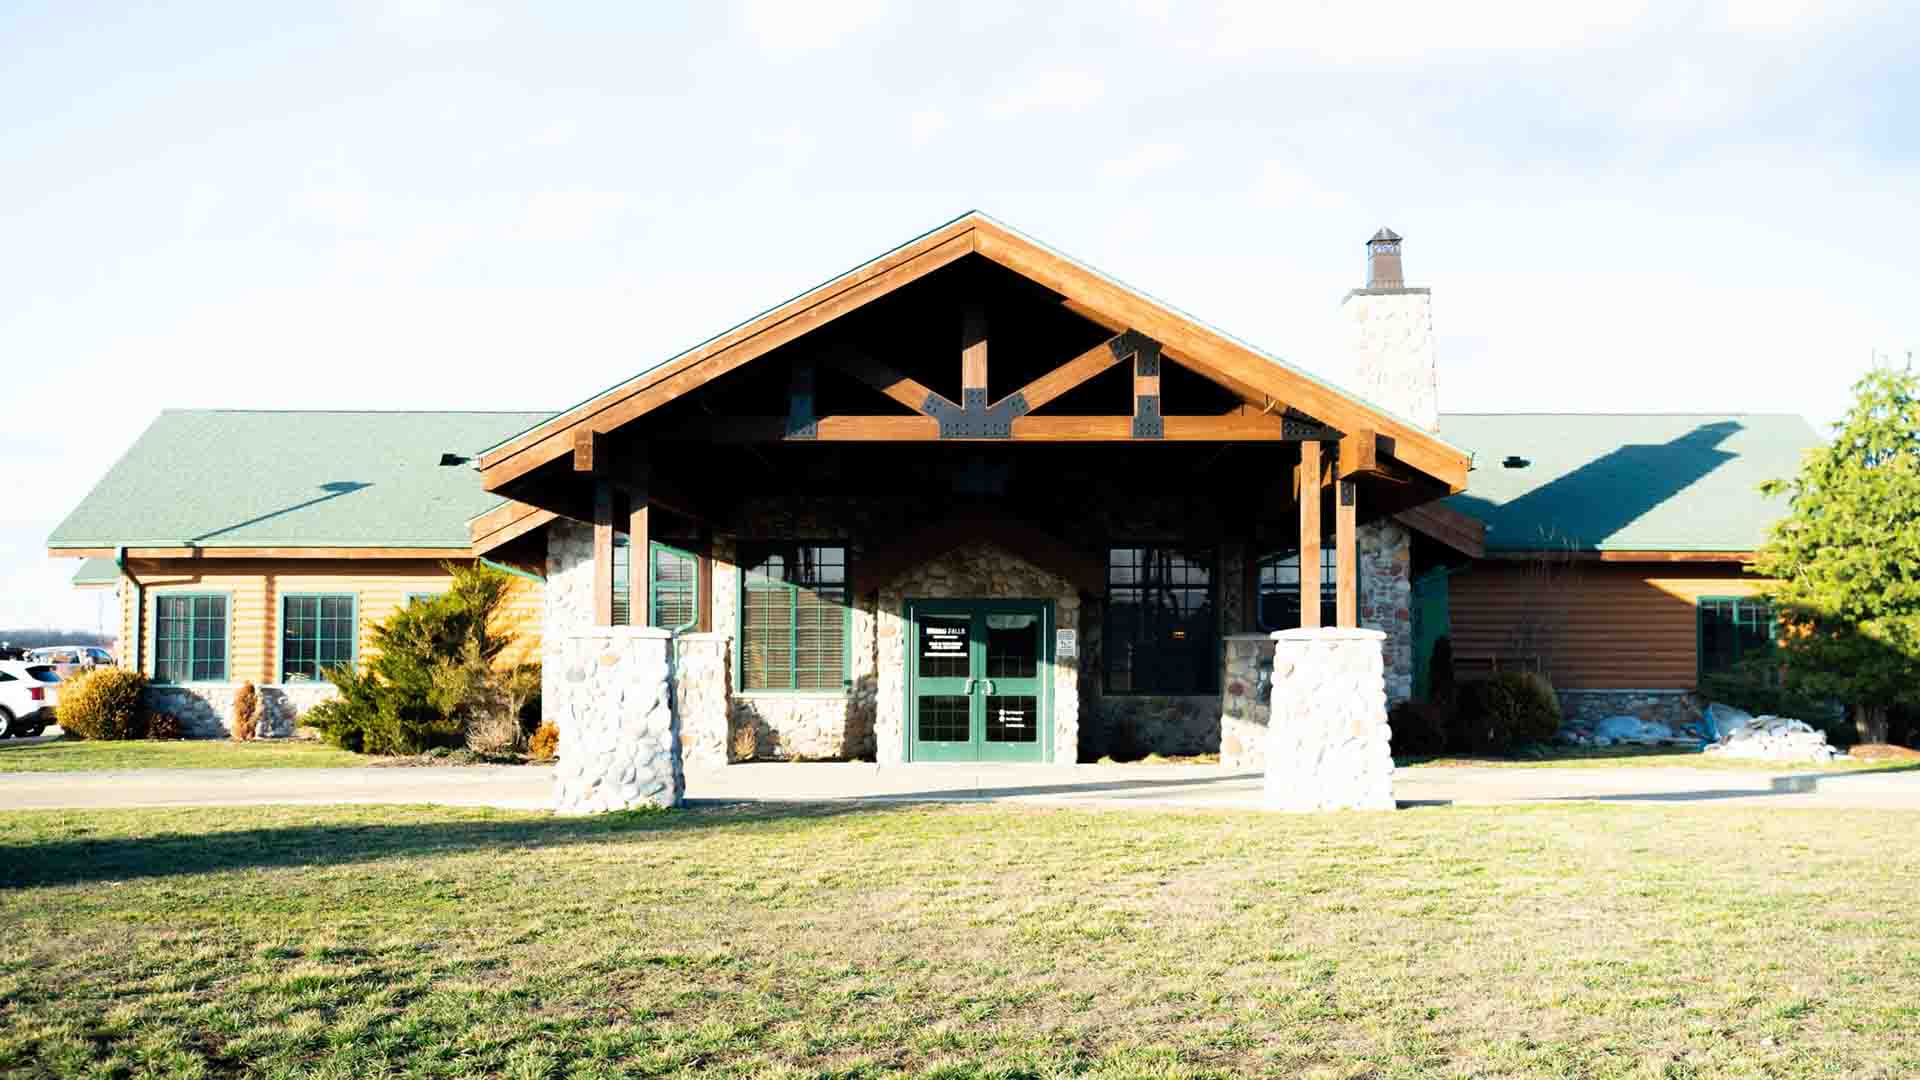 Grand Falls front of the building - Midwestern Addiction Treatment Center